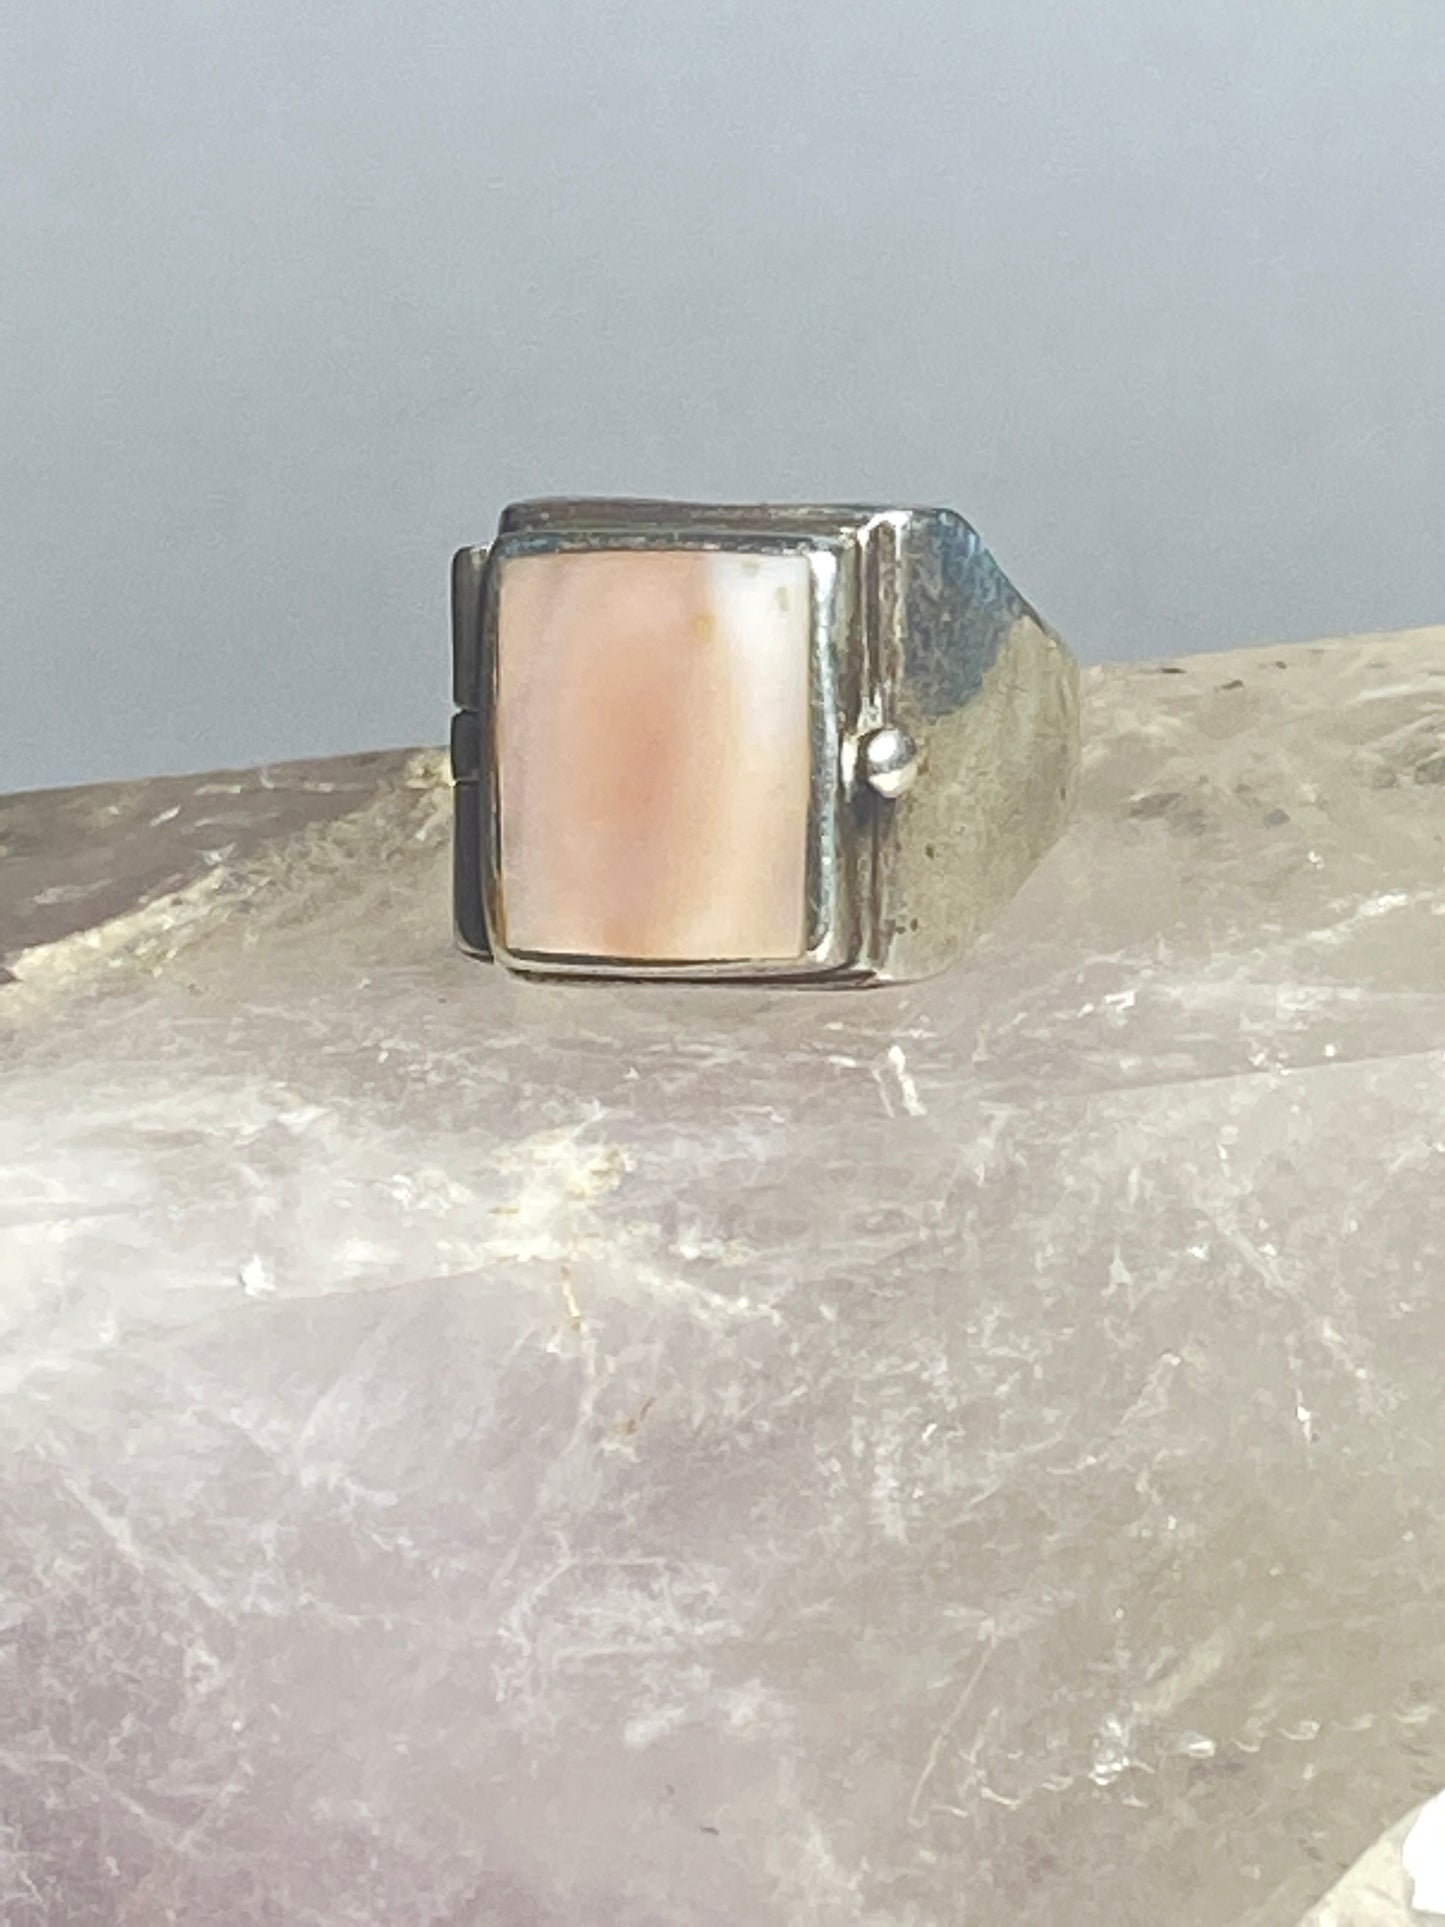 Poison ring mother of pearl southwest sterling silver band women